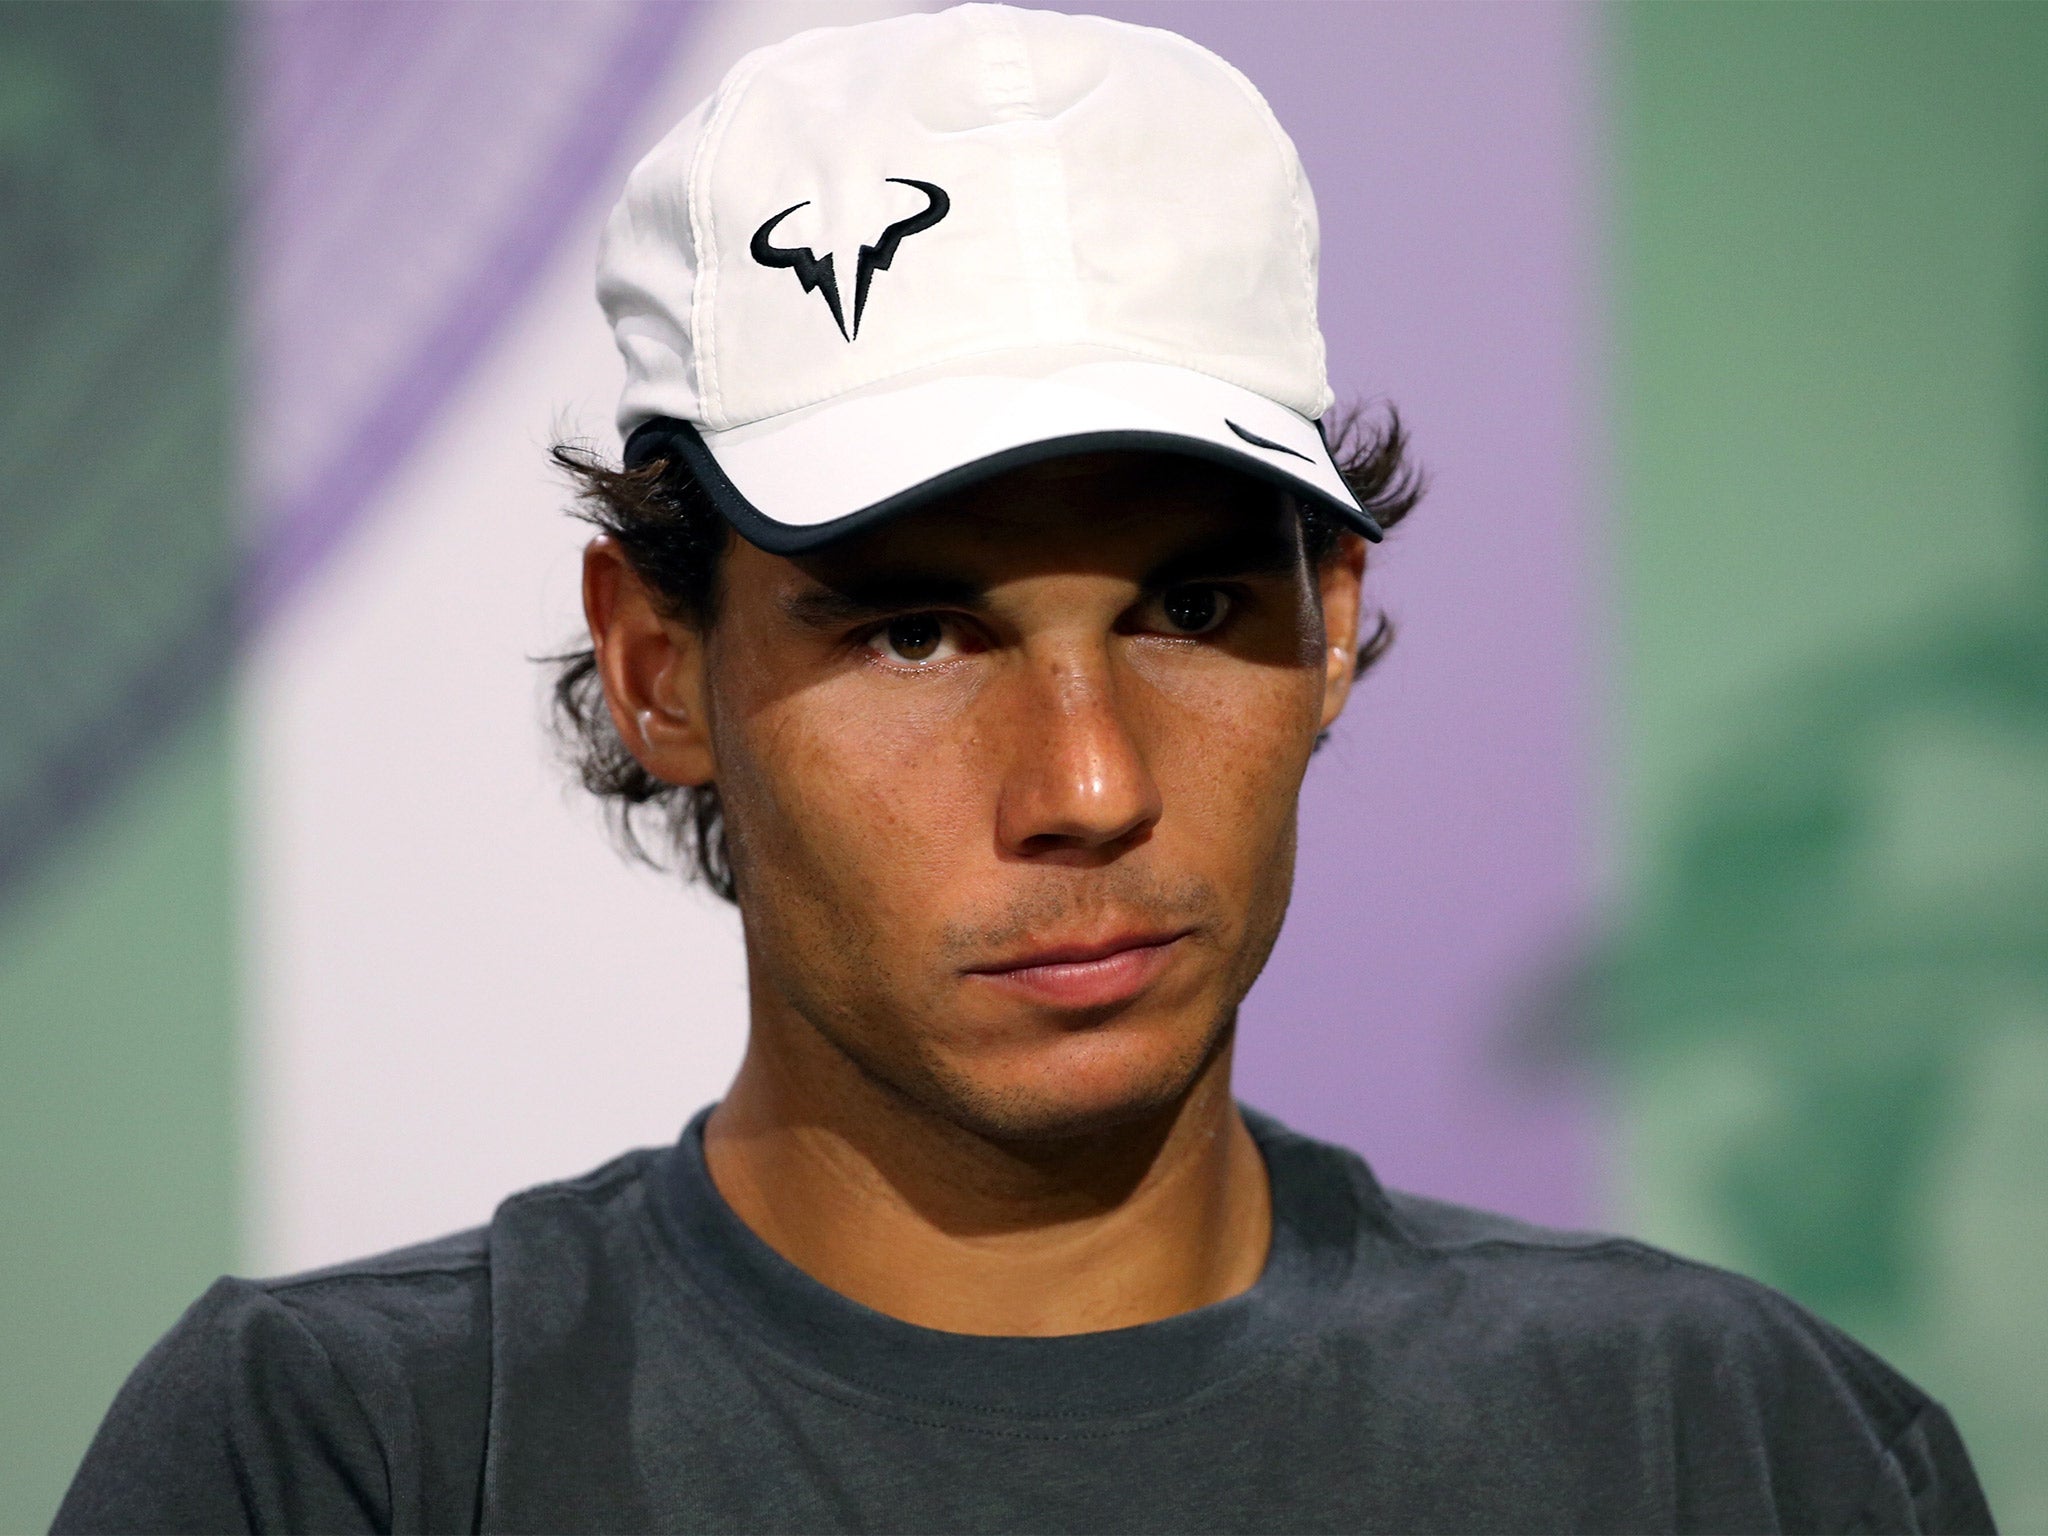 Rafael Nadal has been forced to miss two tournaments in the run-up to the US Open